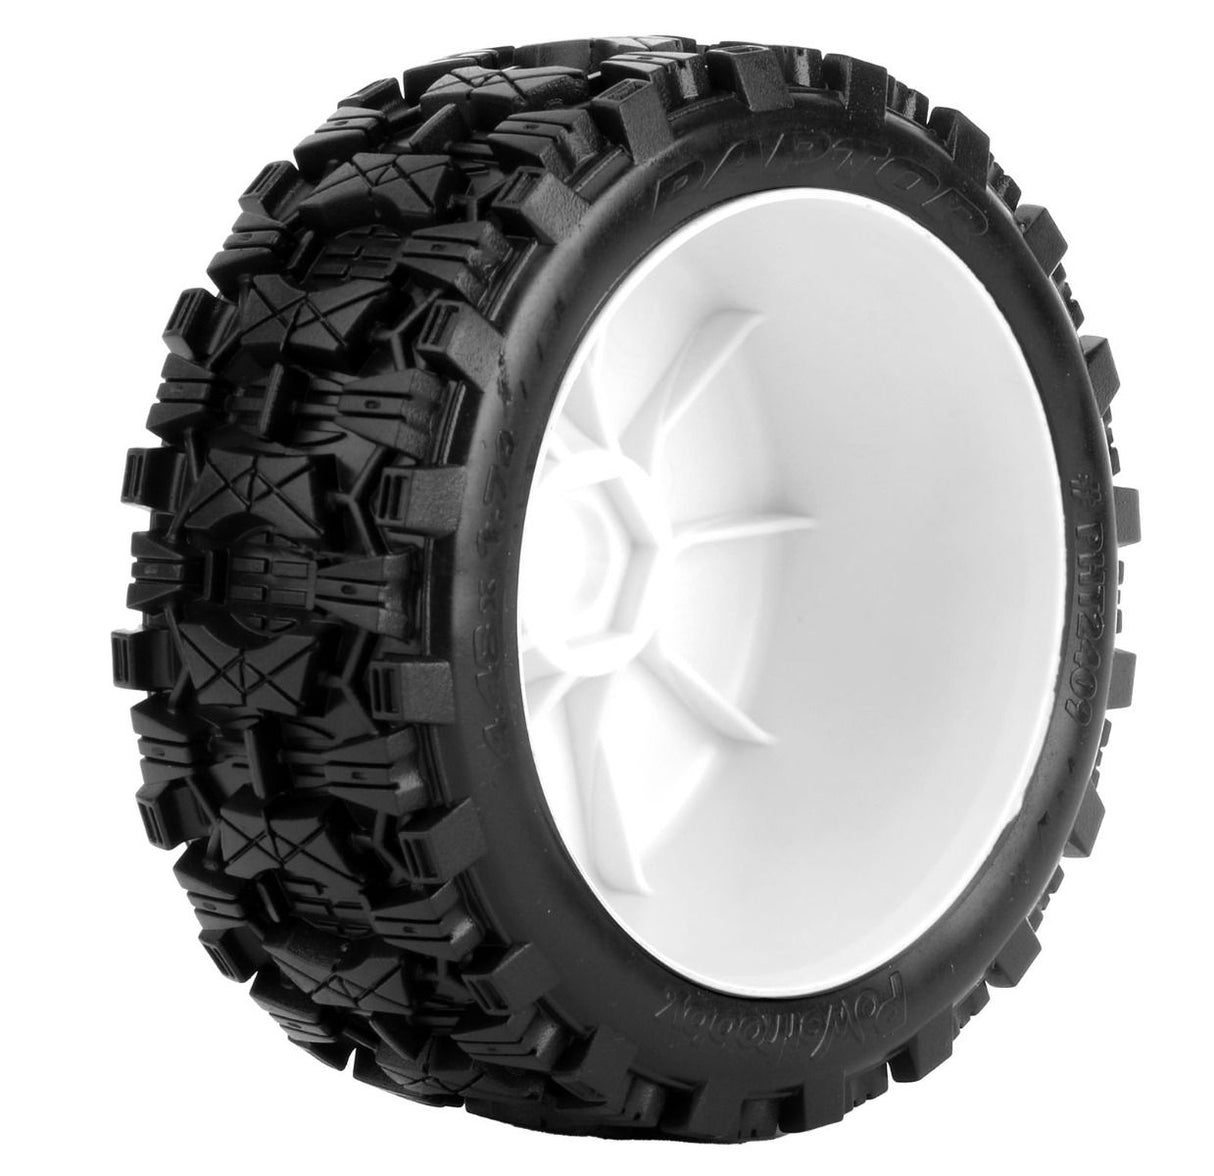 Powerhobby PHT2409DW Raptor 1/8 Buggy Belted All Terrain Mounted Tires 17MM